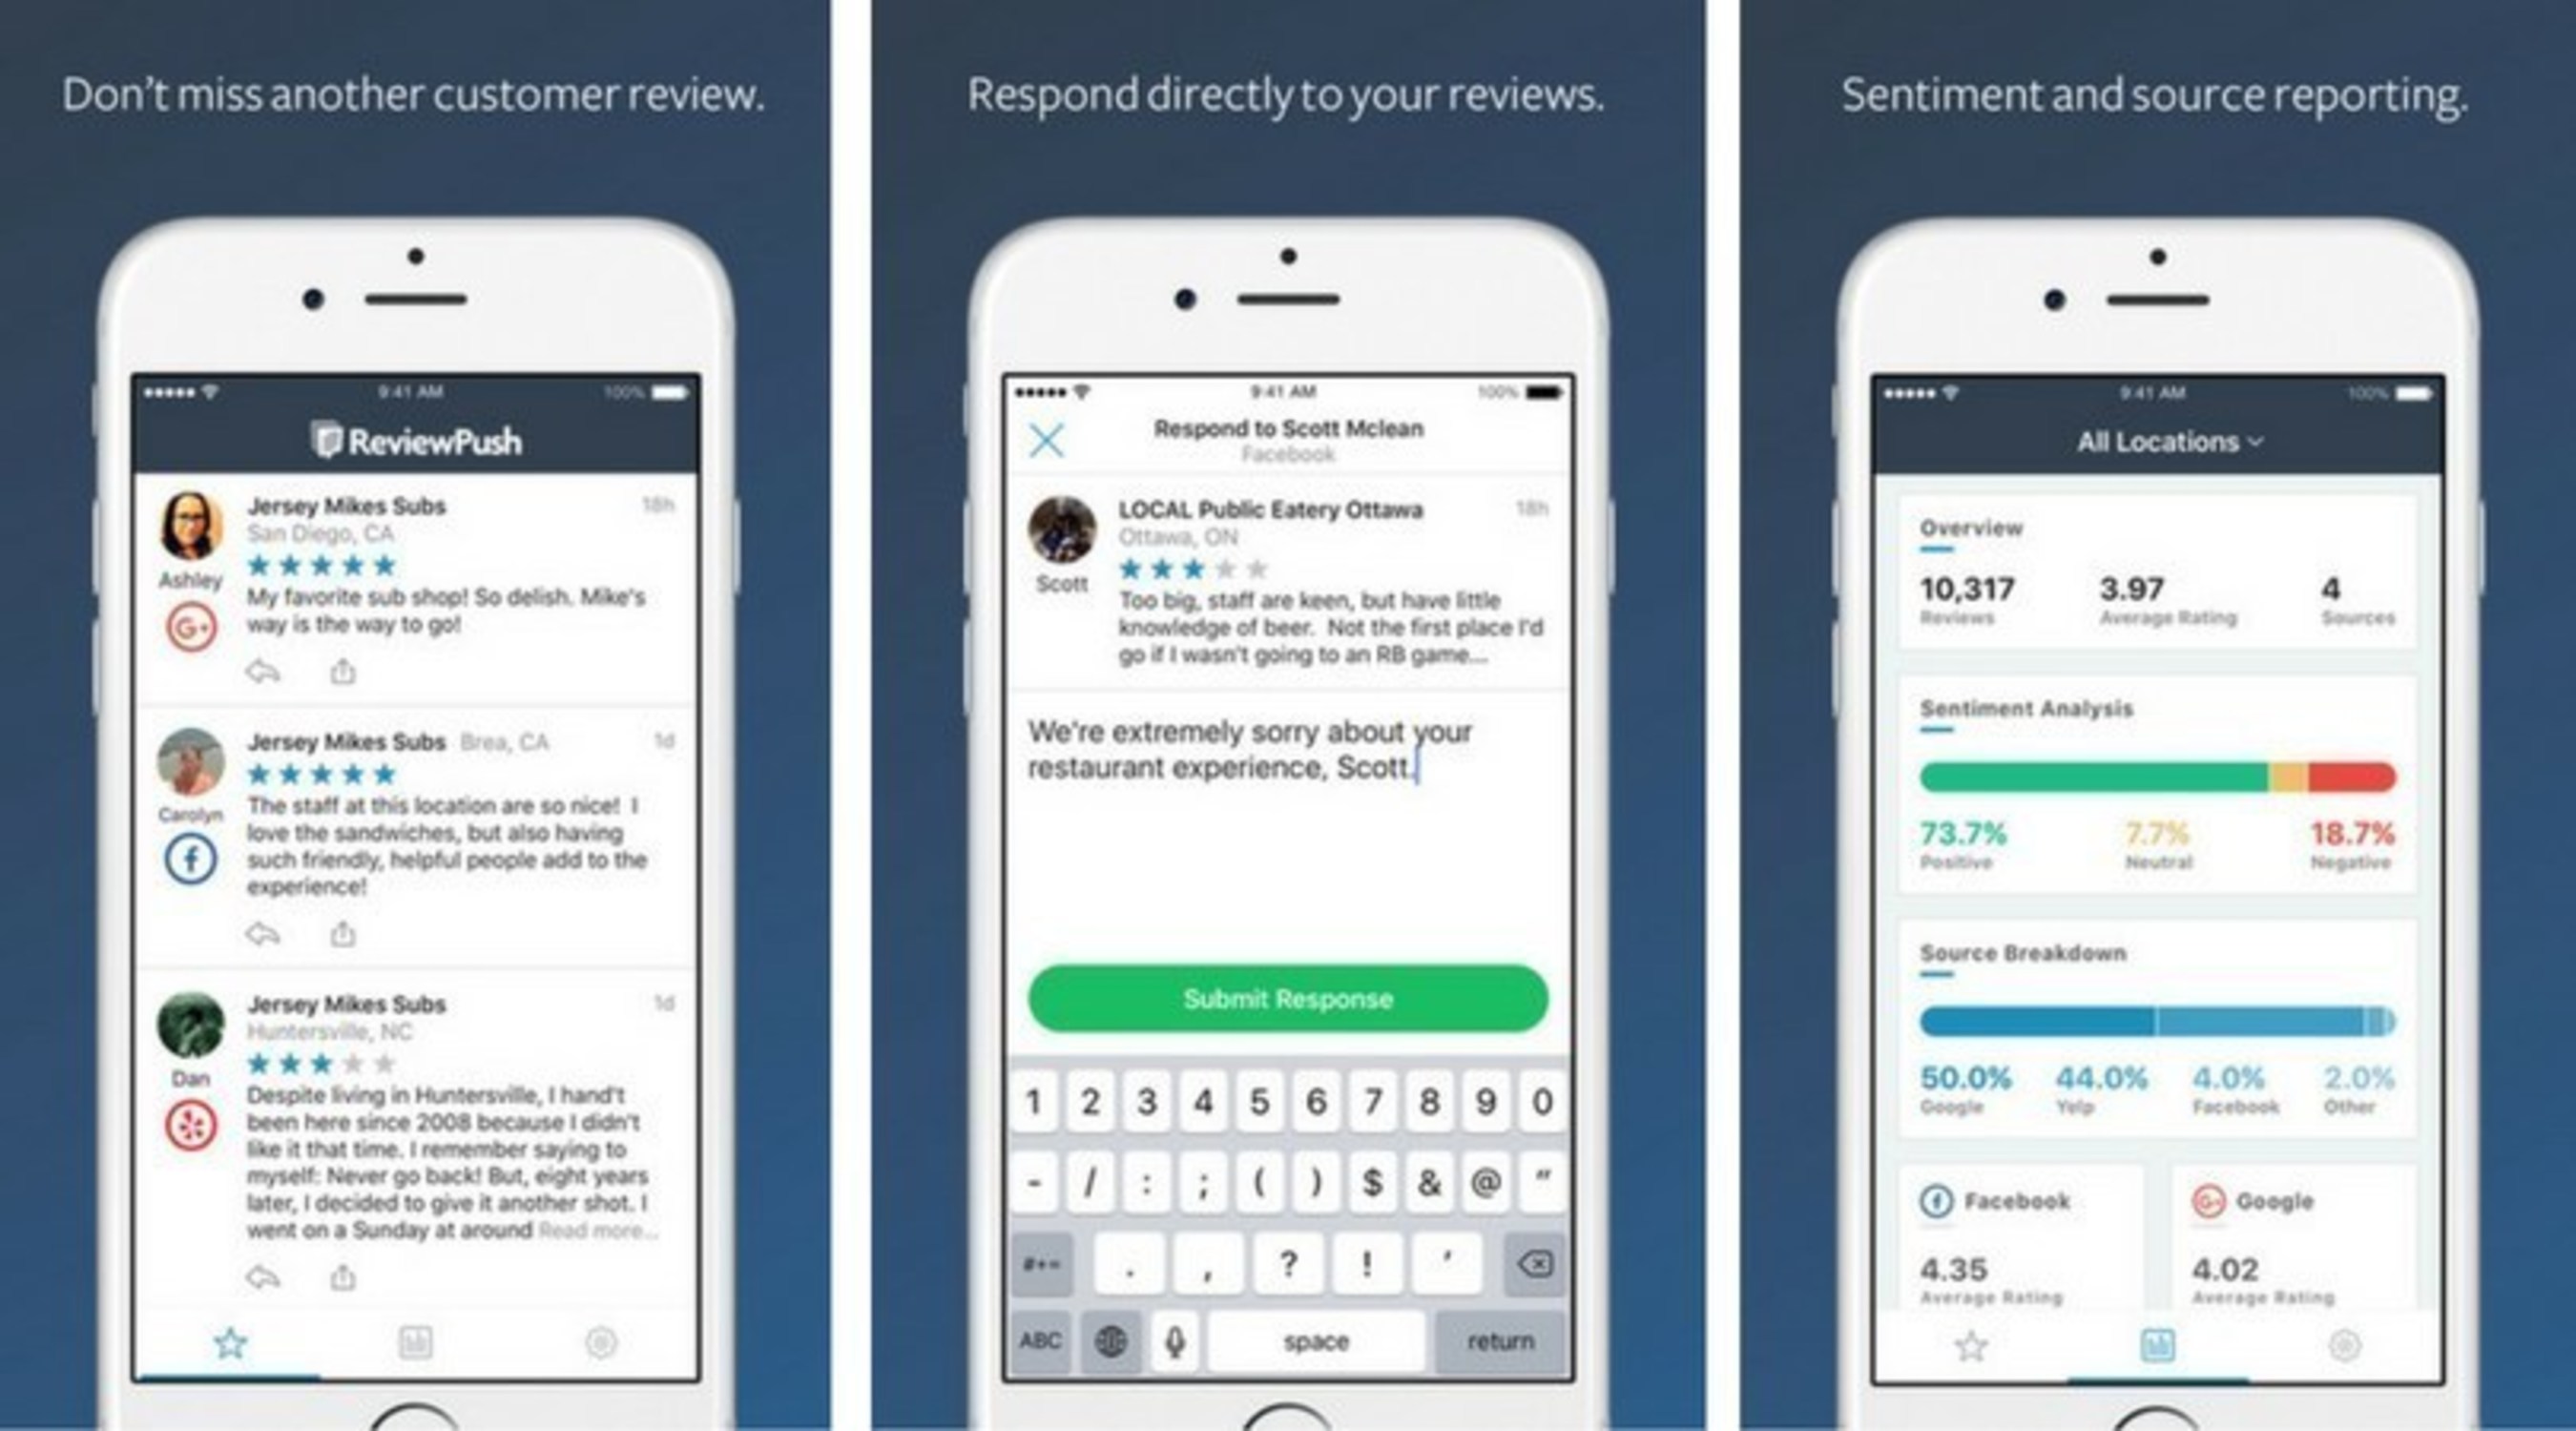 Manage your online reviews on the go with the ReviewPush mobile app!